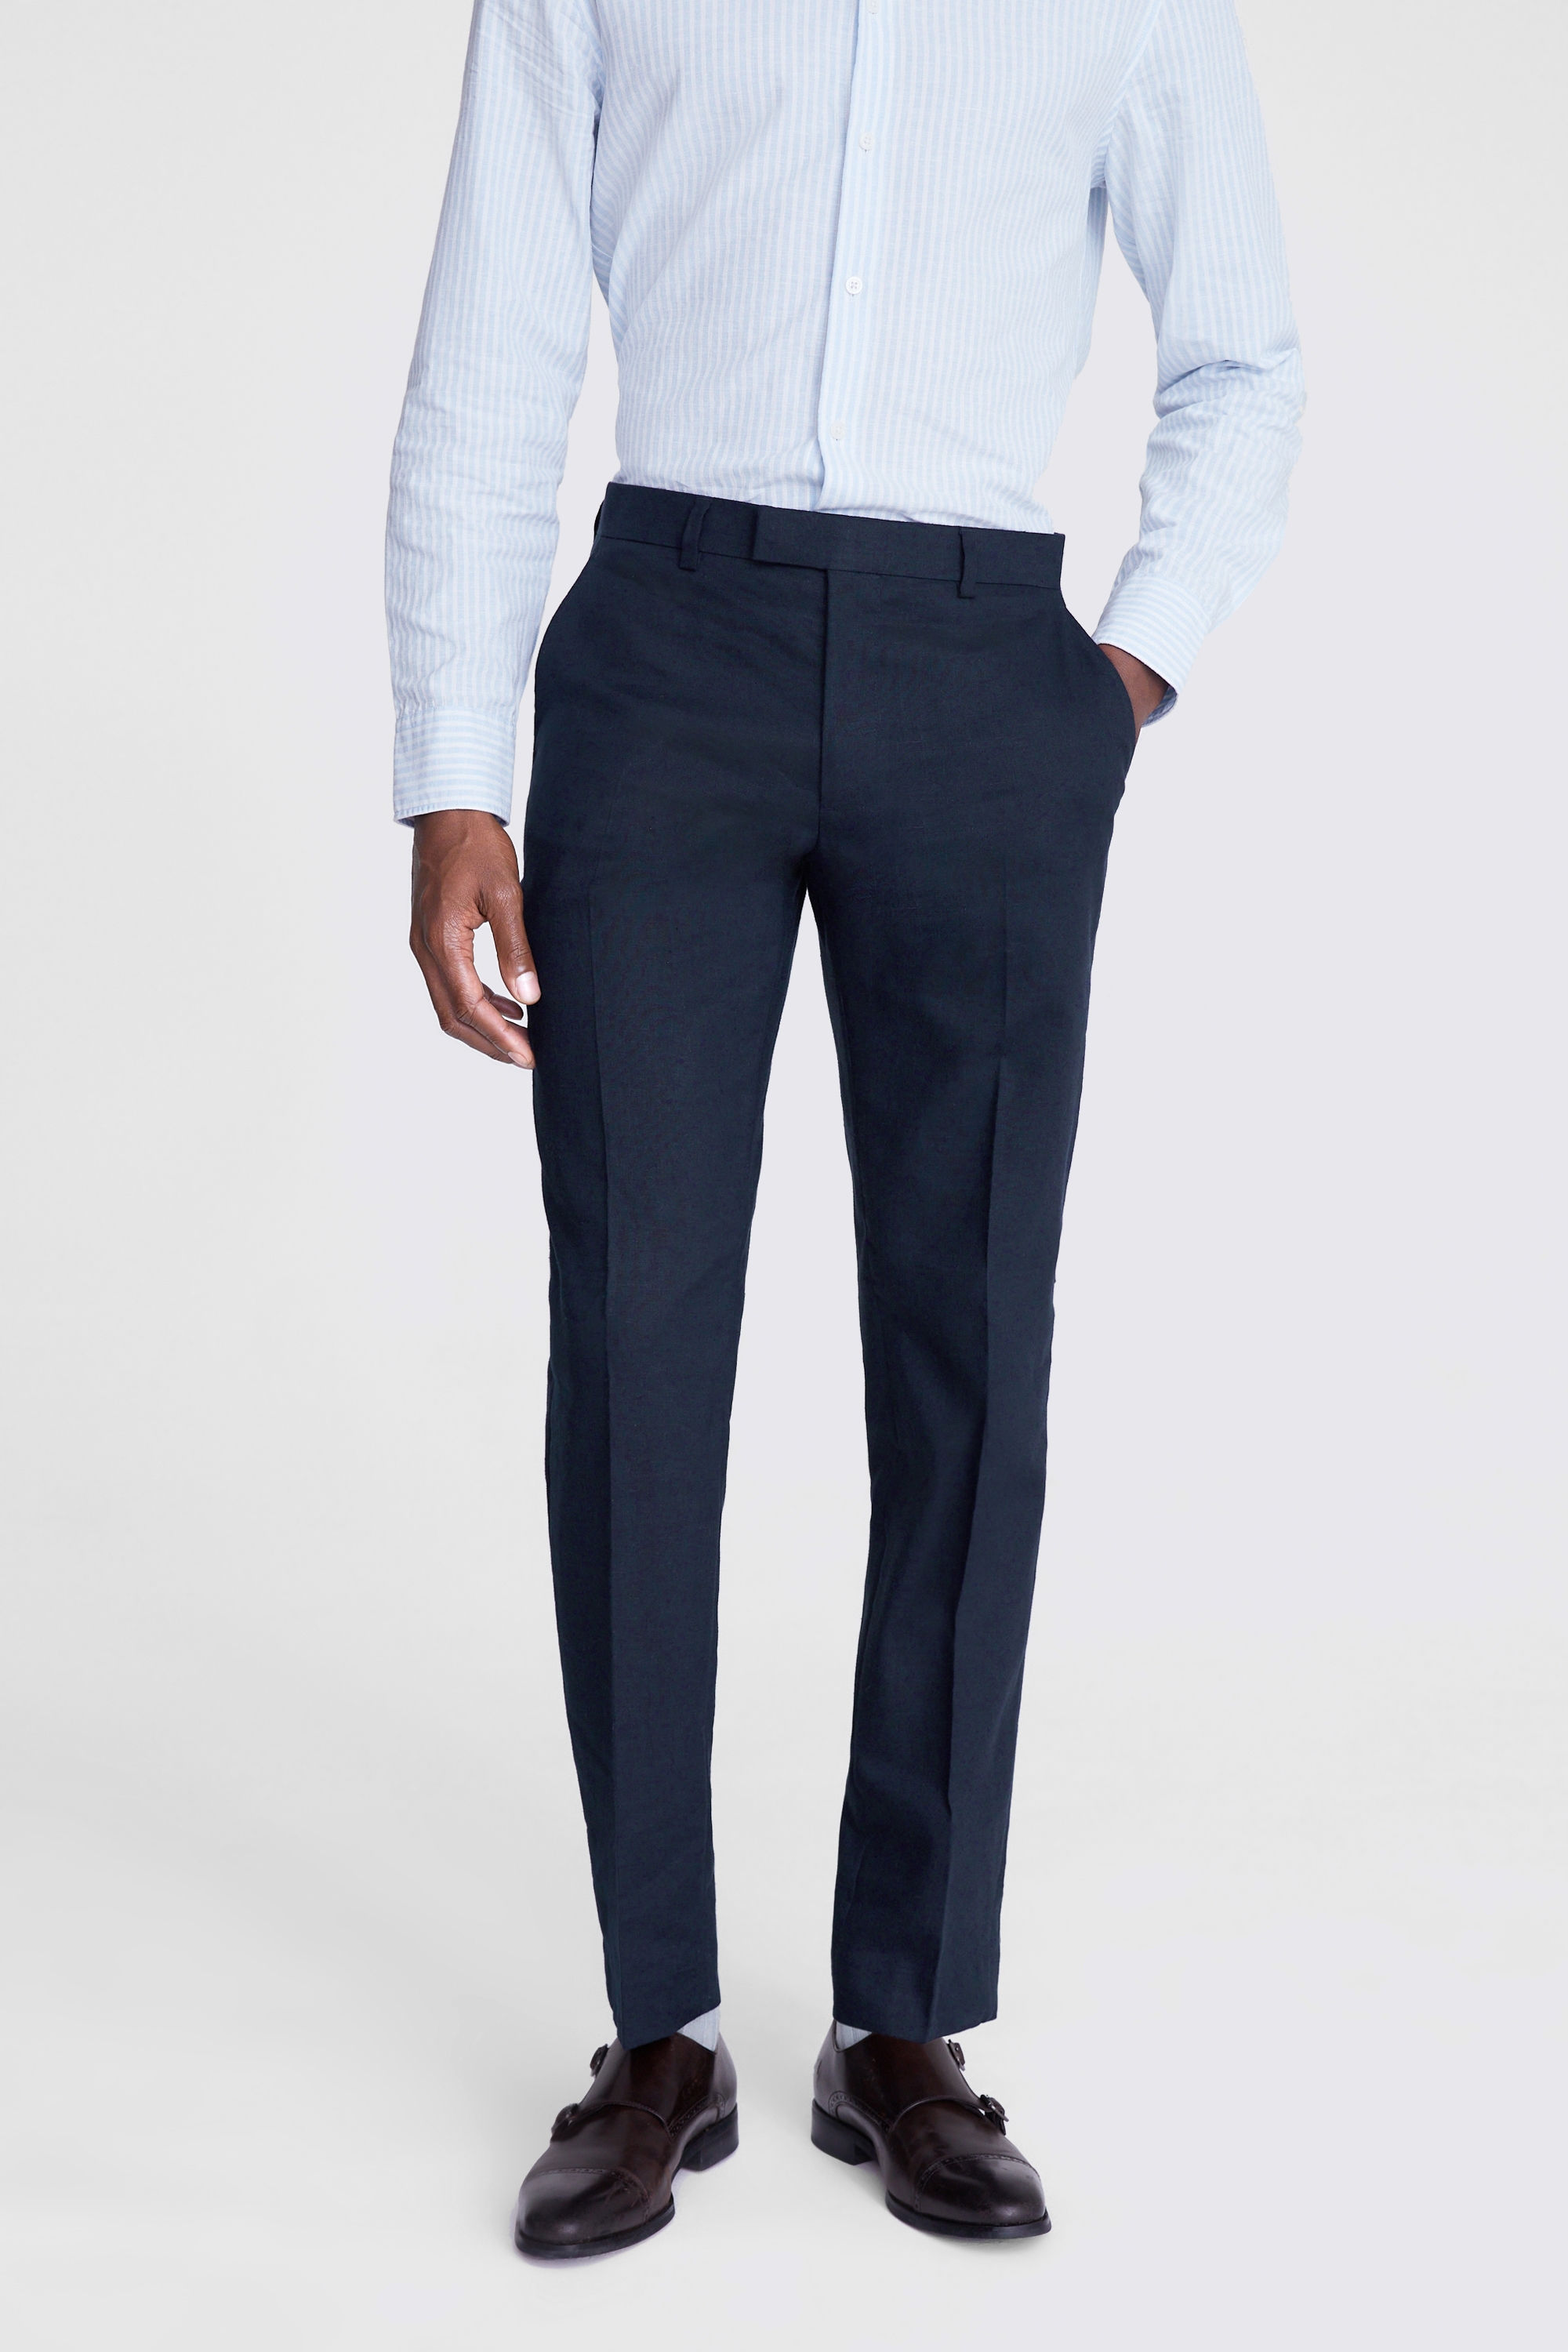 Slim Fit Navy Matte Linen Trousers | Buy Online at Moss